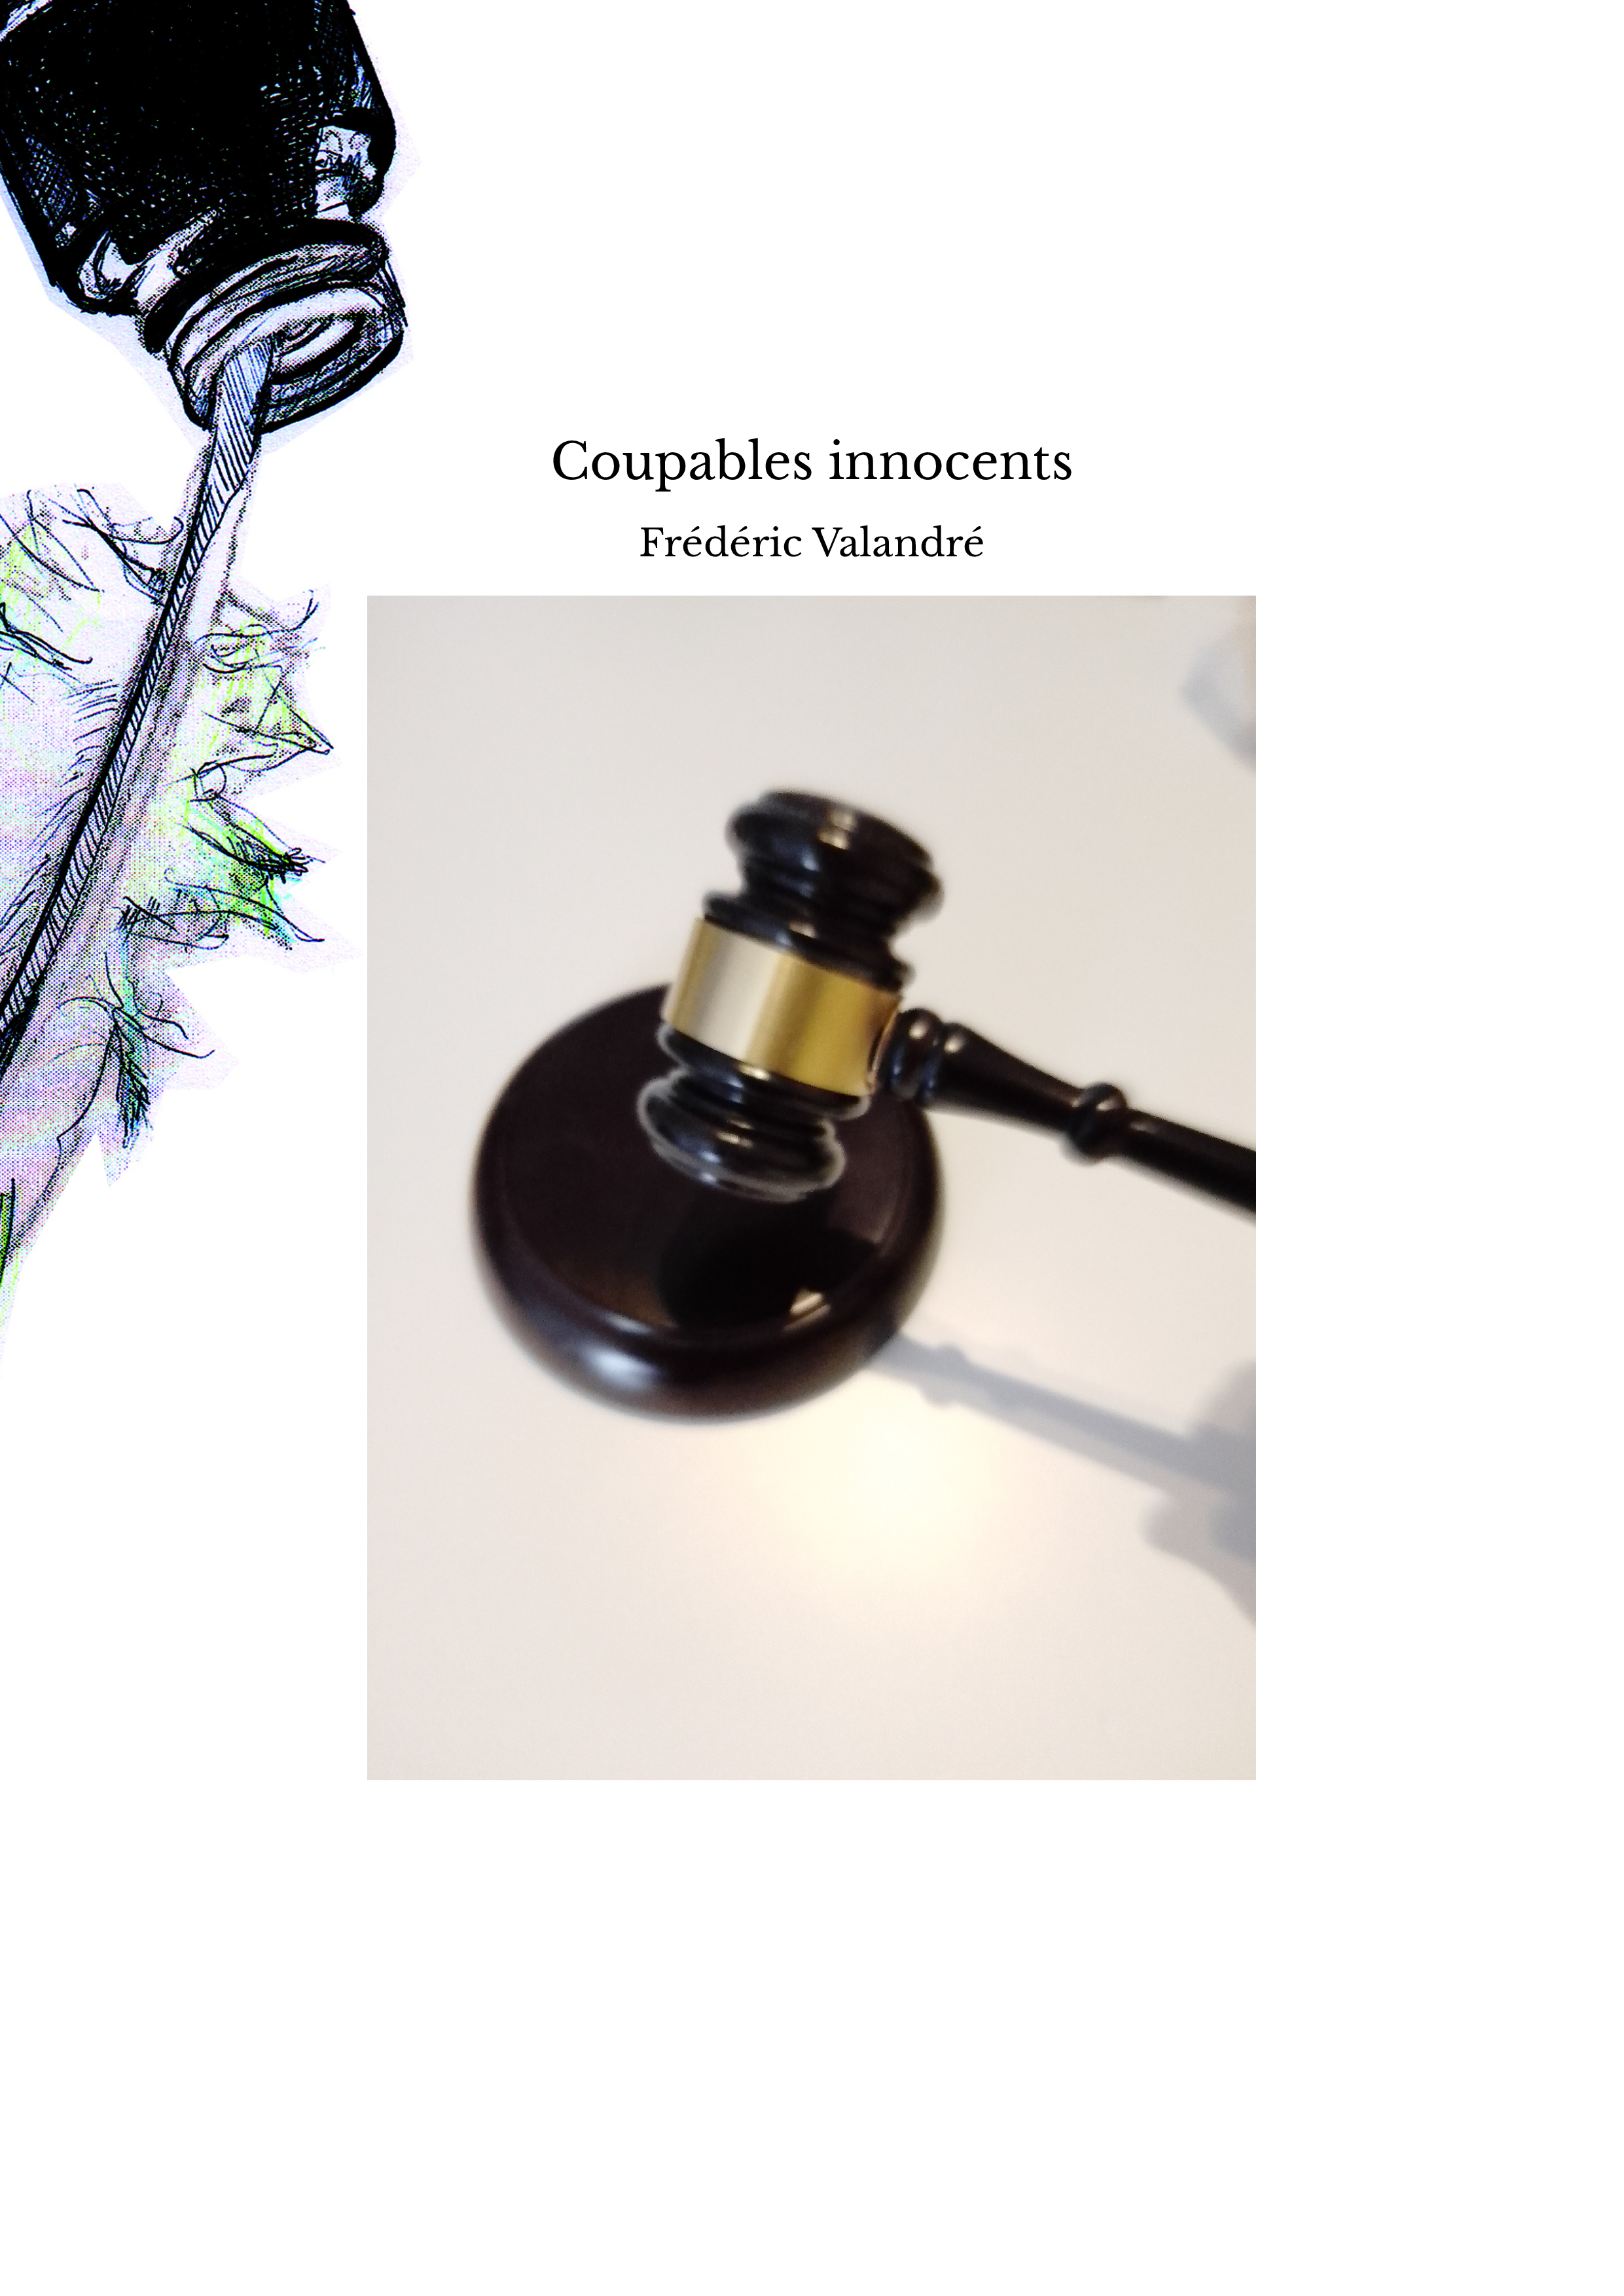 Coupables innocents